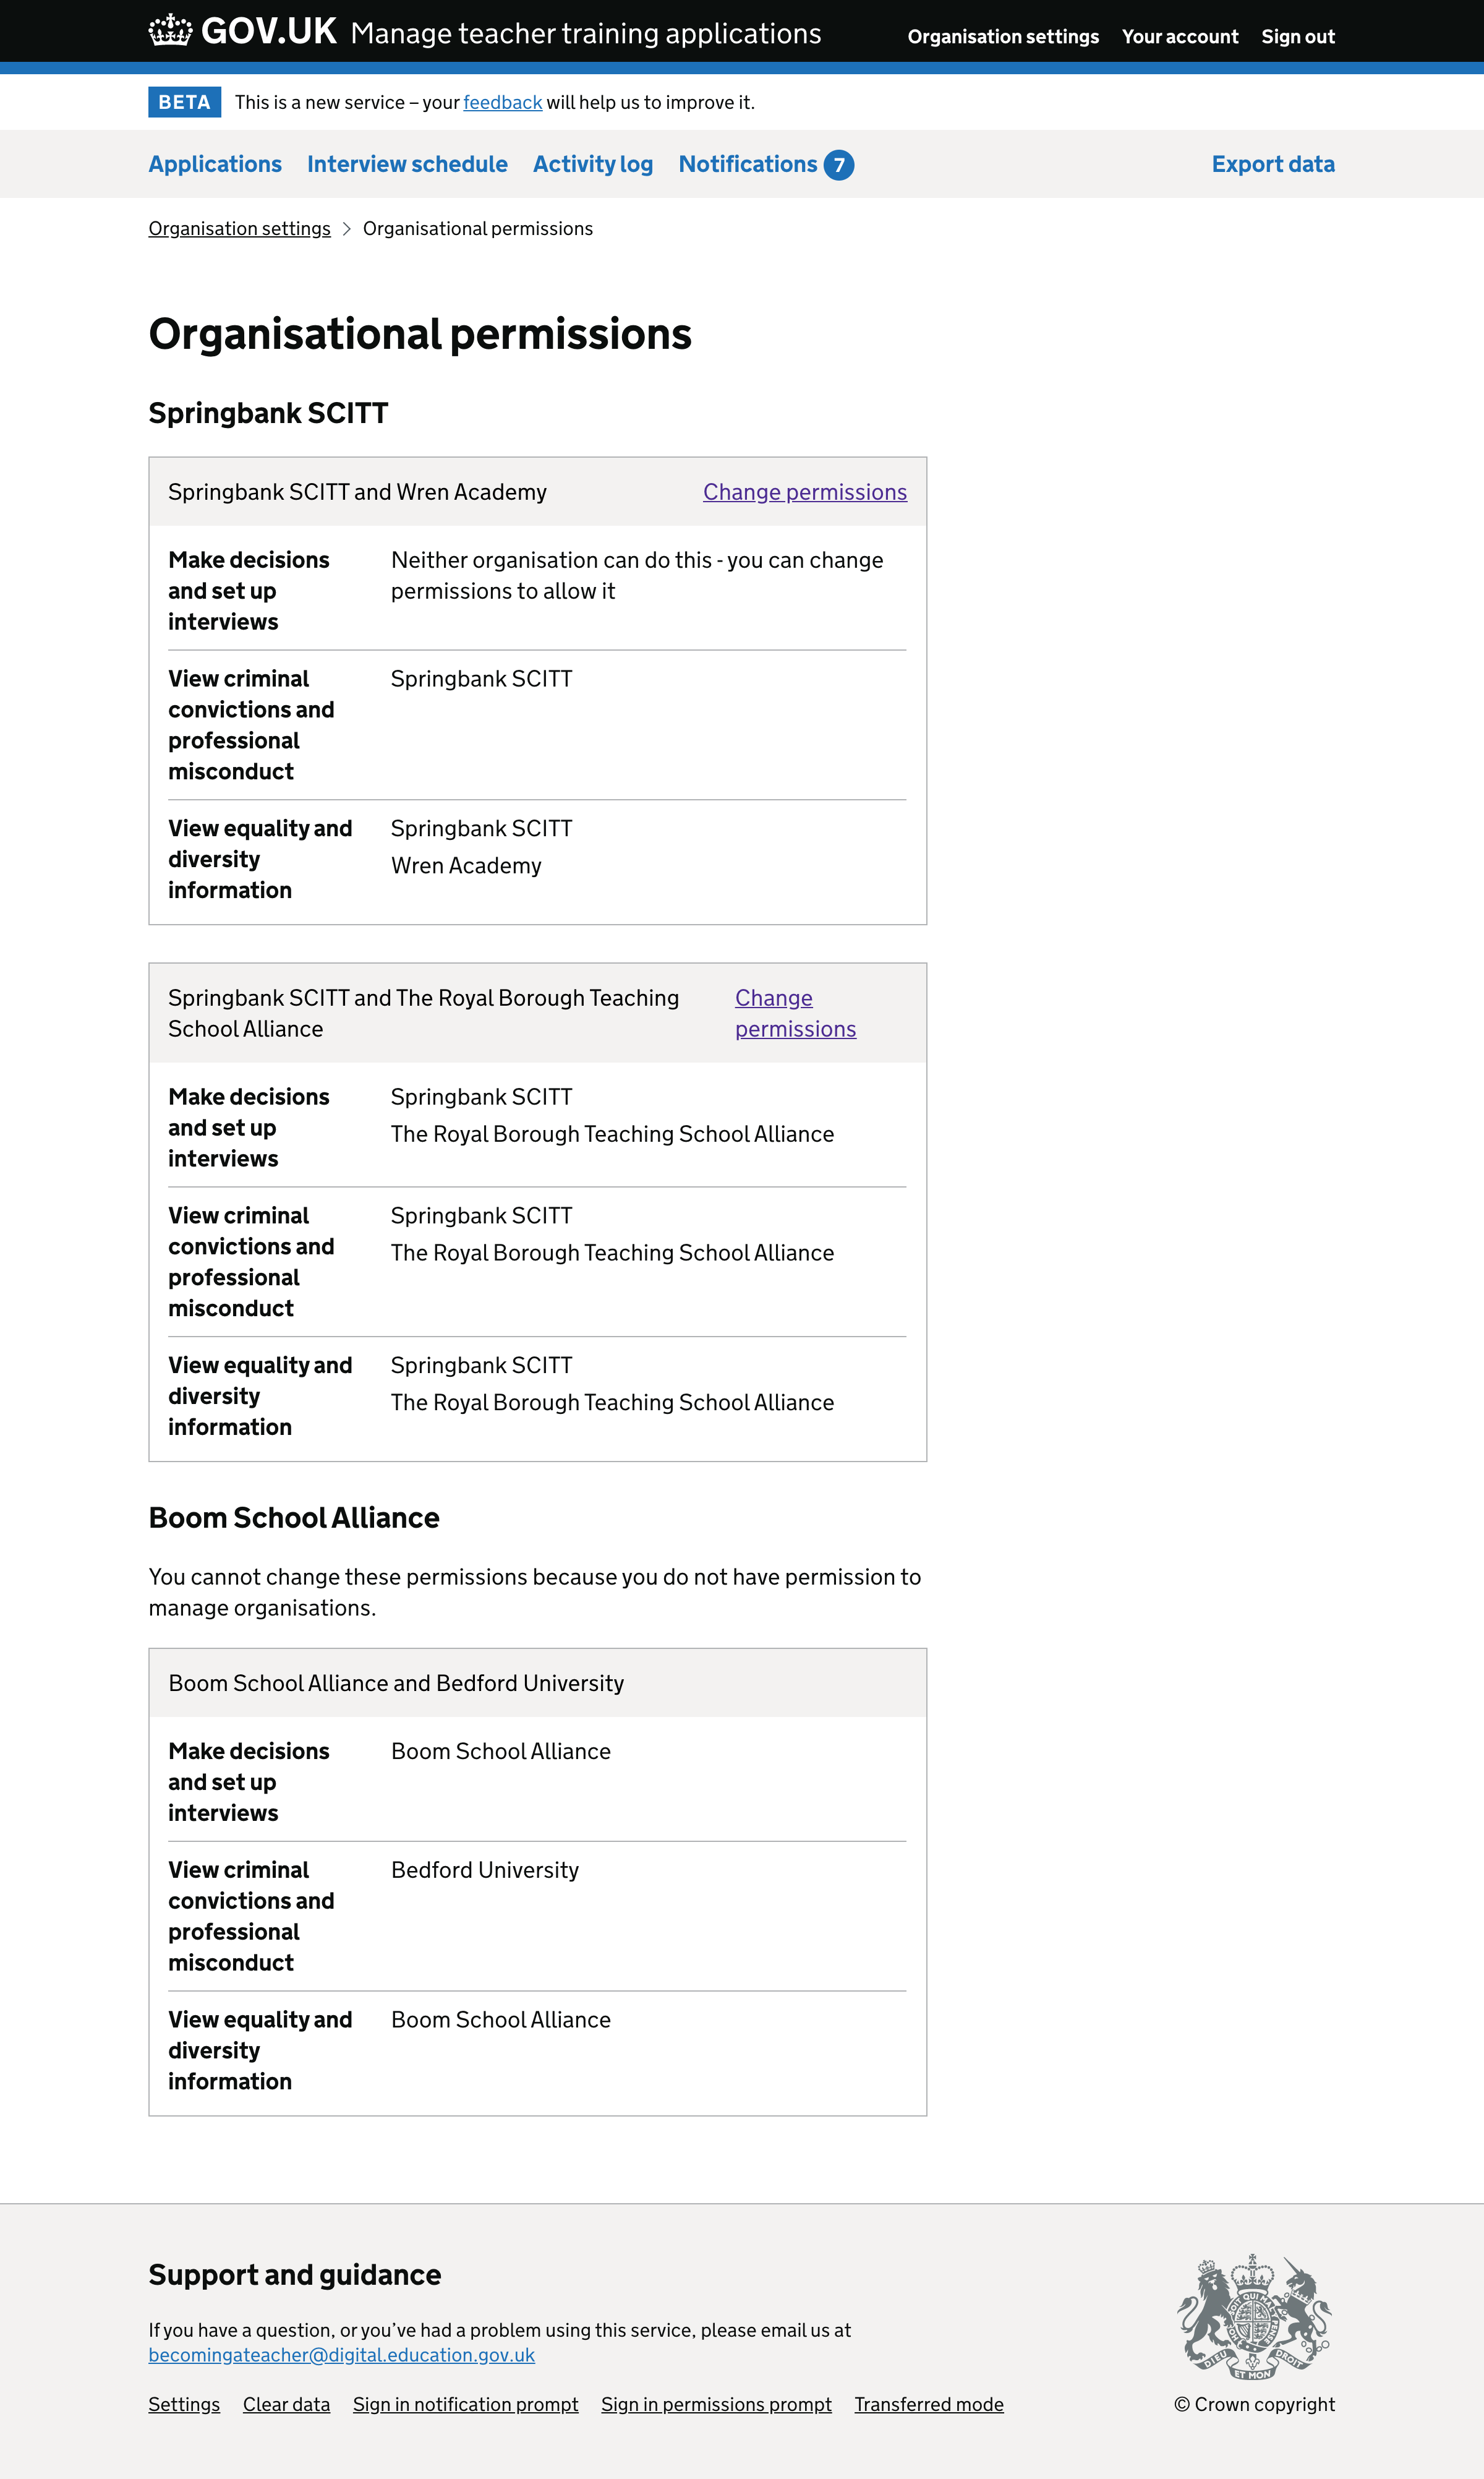 Screenshot of ‘Organisational permissions’ page.